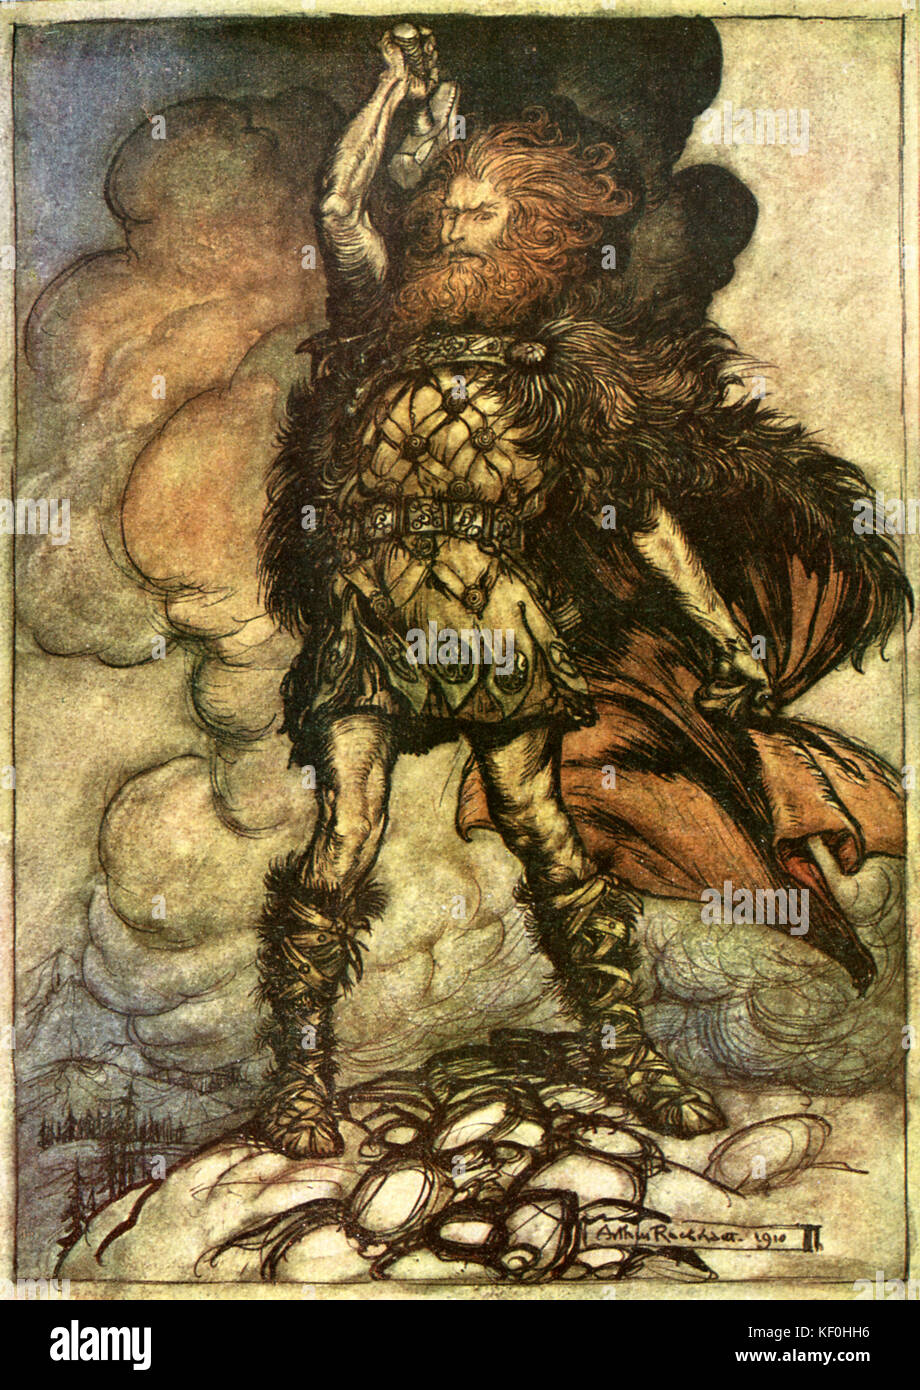 The Rhinegold / Das Rheingold by Richard Wagner. Donner, West Germanic god of thunder, summons a storm with his hammer.  Illustration by Arthur Rackham 1867 - 1939.  Caption:  'To my hammer's swing hitherward sweep vapours and fogs! Hovering mists! Donner, your lord, summons his hosts' Scene 4.  From 'The Ring Cycle' / 'Der Ring des Nibelungen'.  RW German composer & author, 22 May 1813 - 13 February 1883. Stock Photo